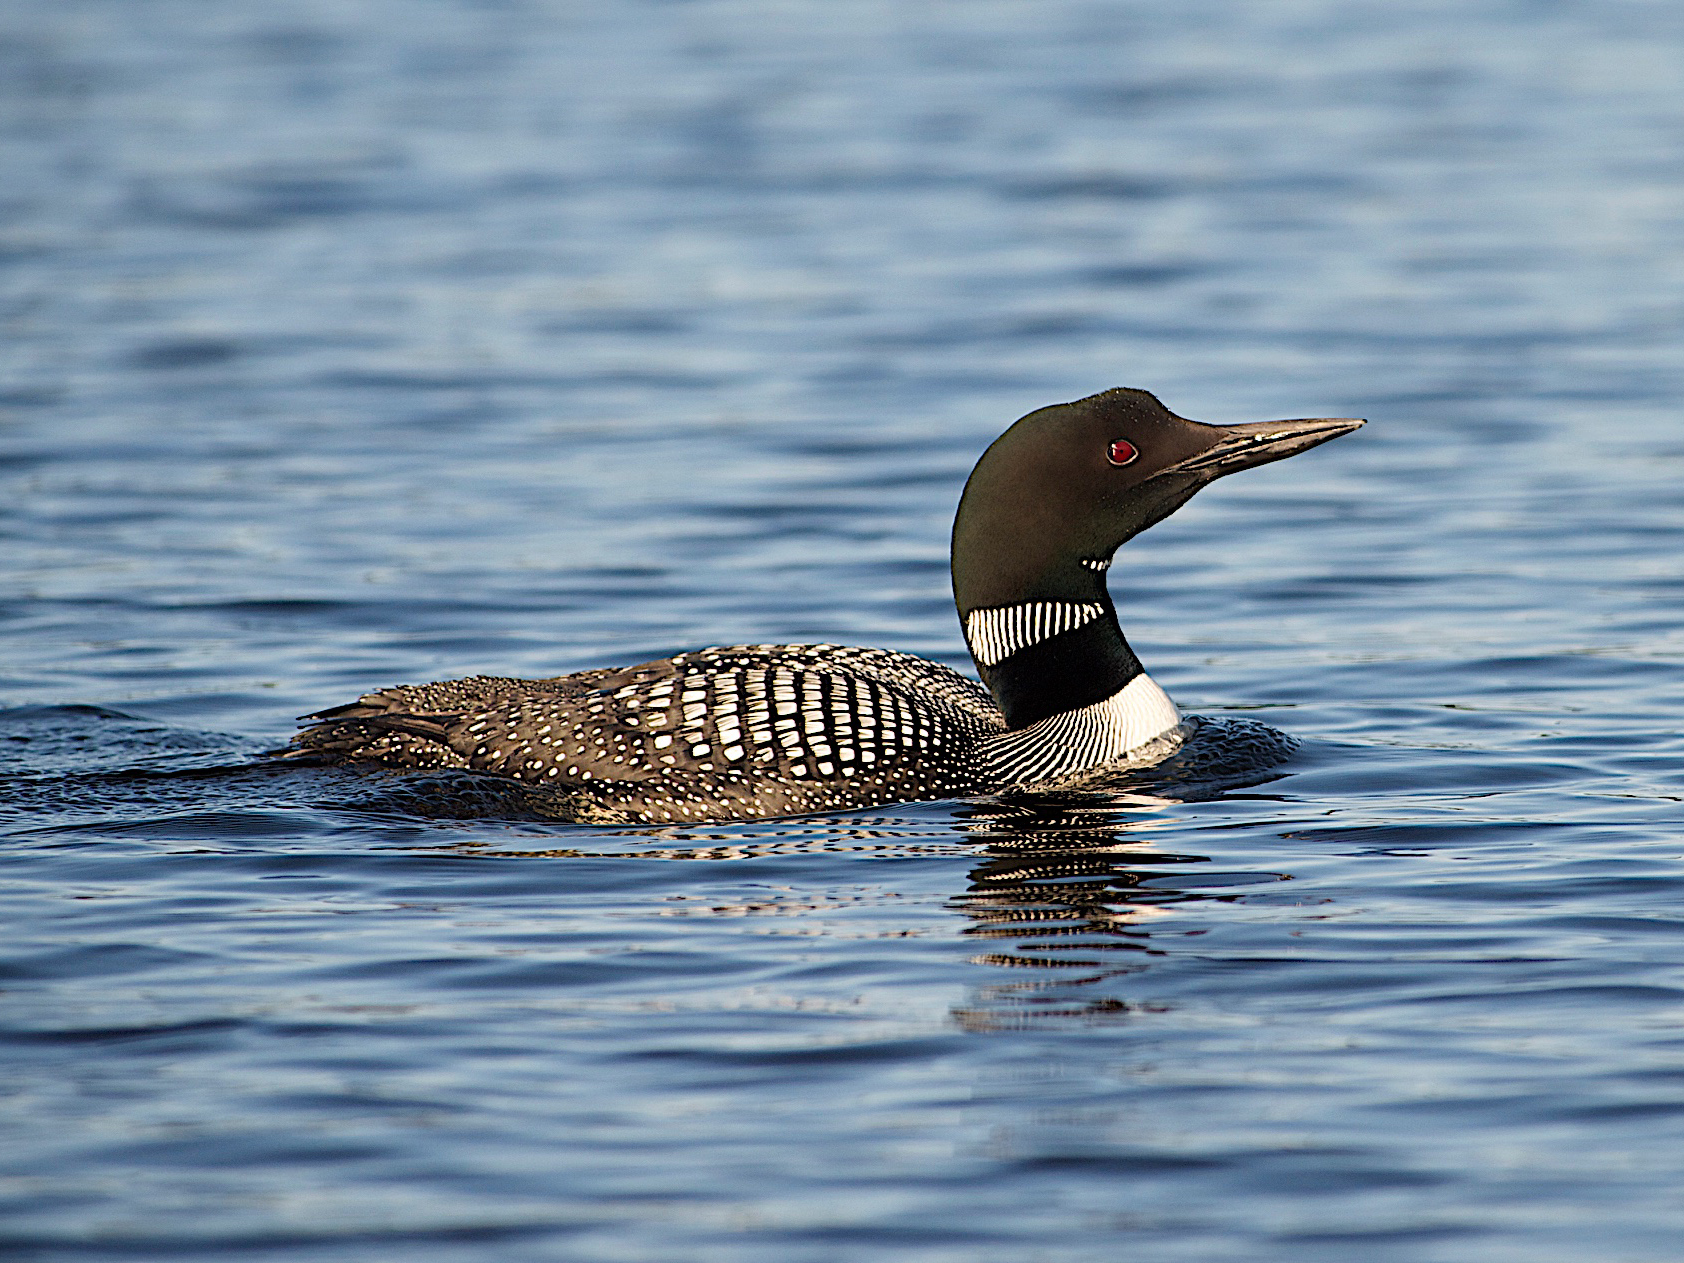 The common loon